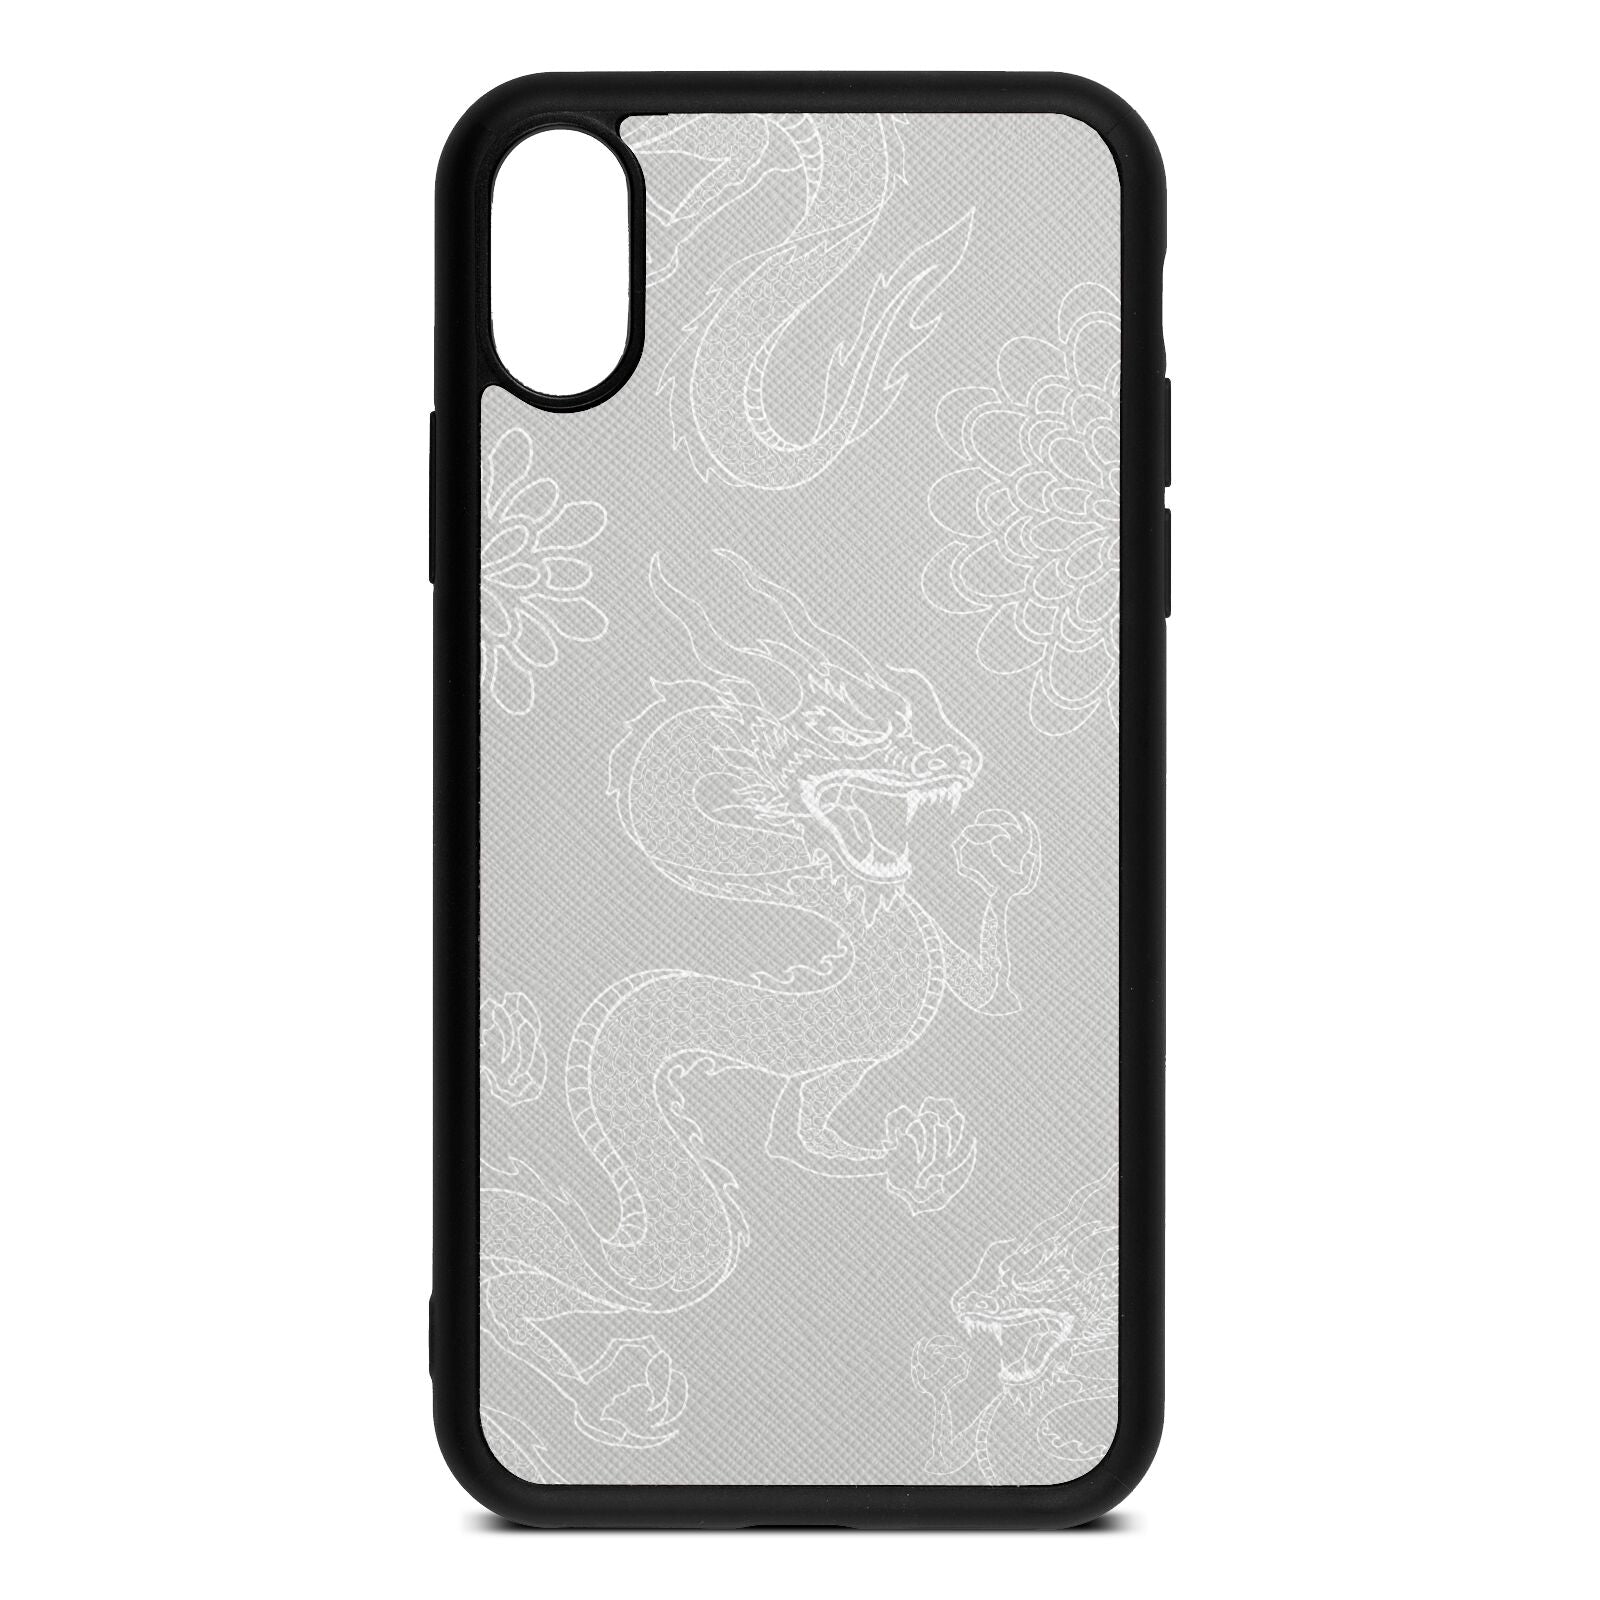 Dragons Silver Saffiano Leather iPhone Xs Case